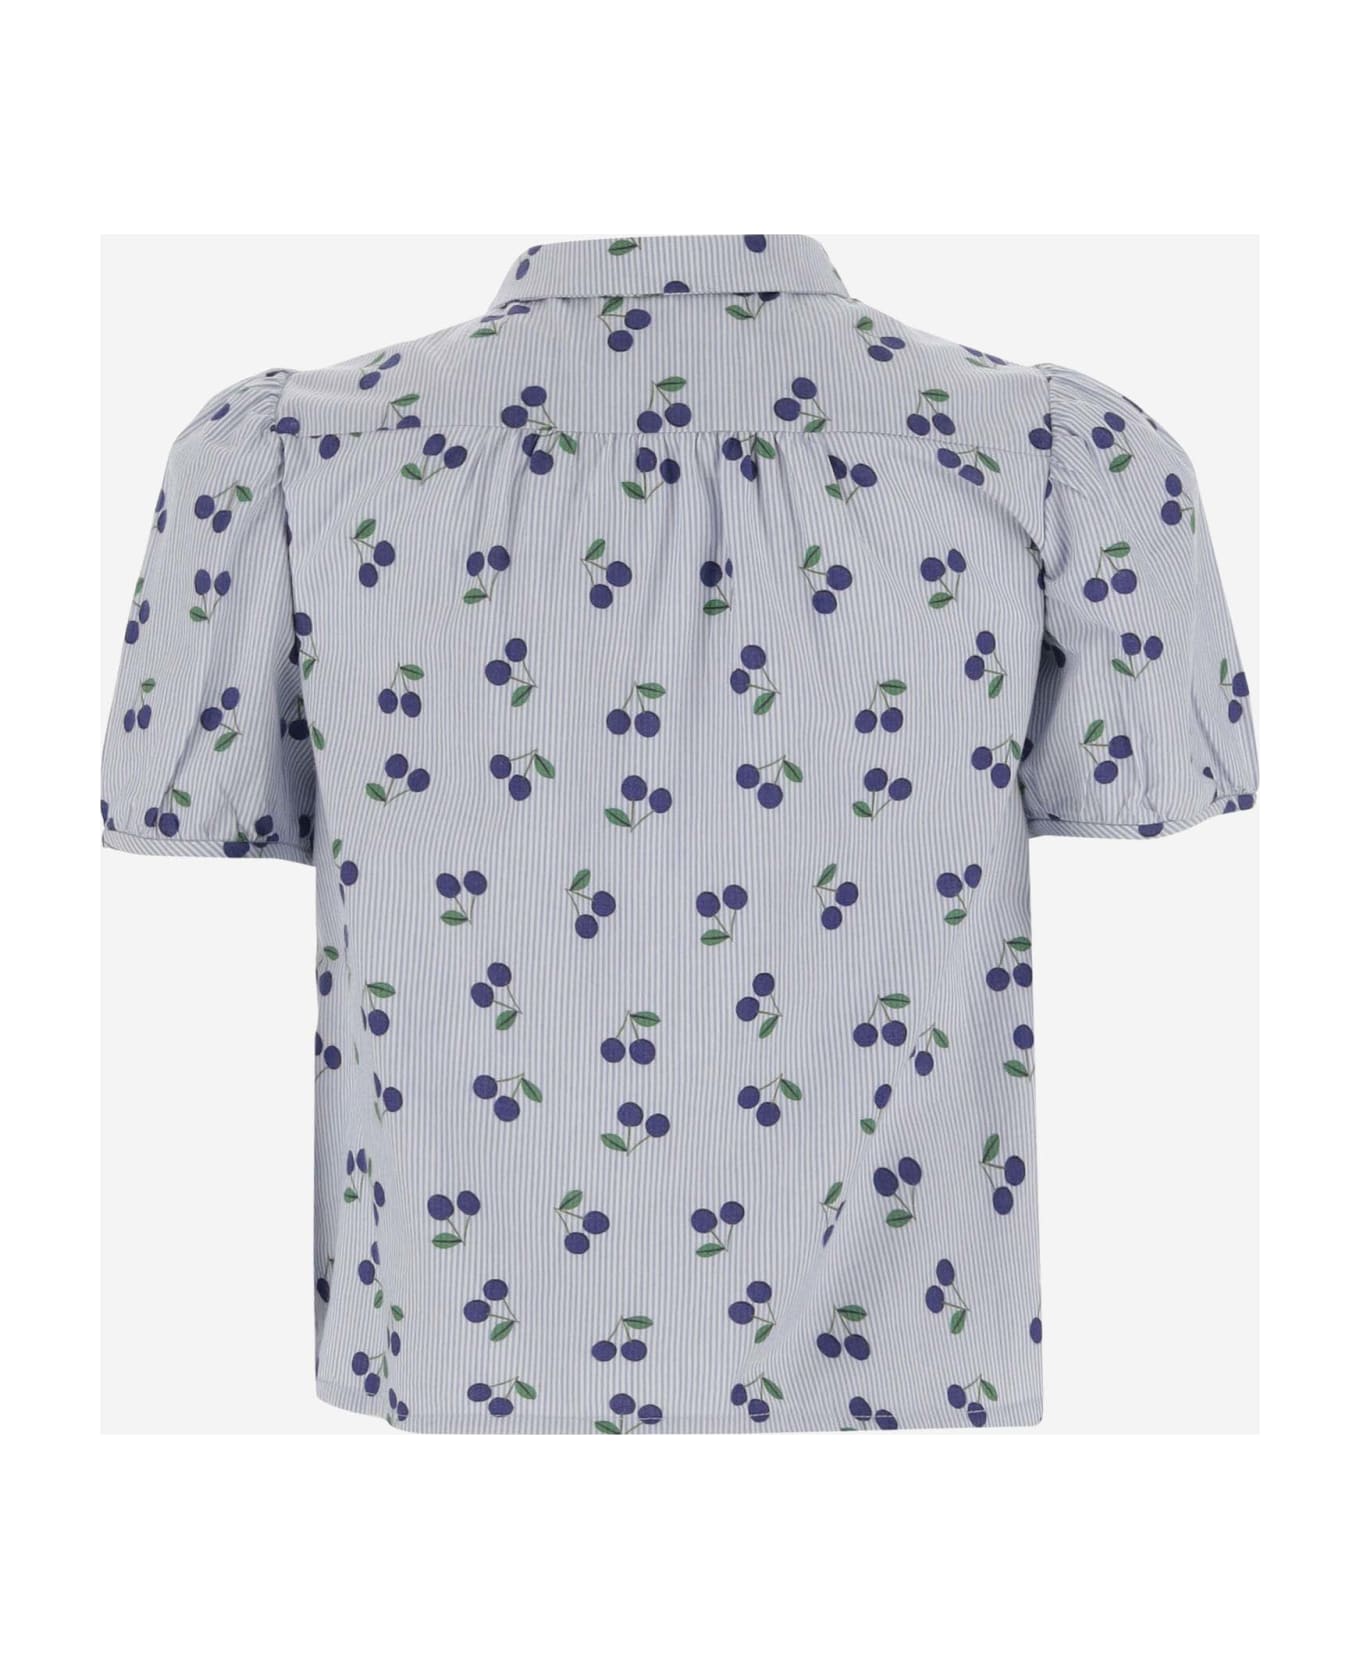 Bonpoint Cotton Shirt With Cherry Pattern - Cielo シャツ